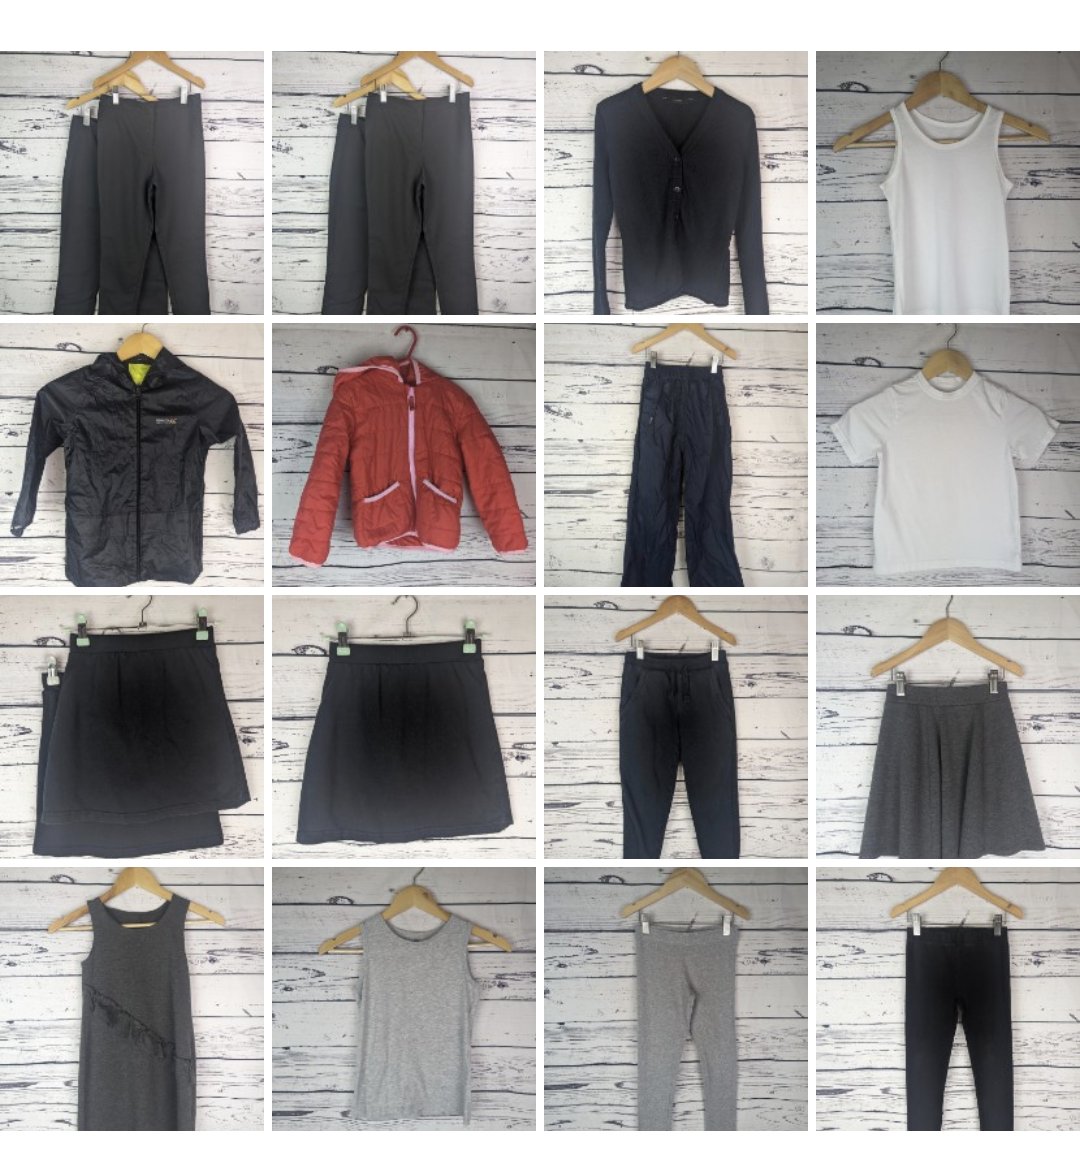 Good evening!

I'm still working 🥱 But needs must!

Here is the upload of school Clothing, 46 items of school wear! Girls, Boys & Neutral! 

littleonespreloved.co.uk 

#schoolwear #prelovedschoolwear #prelovedschoolclothes #schoolclothing #affordableclothing #affordablefashion